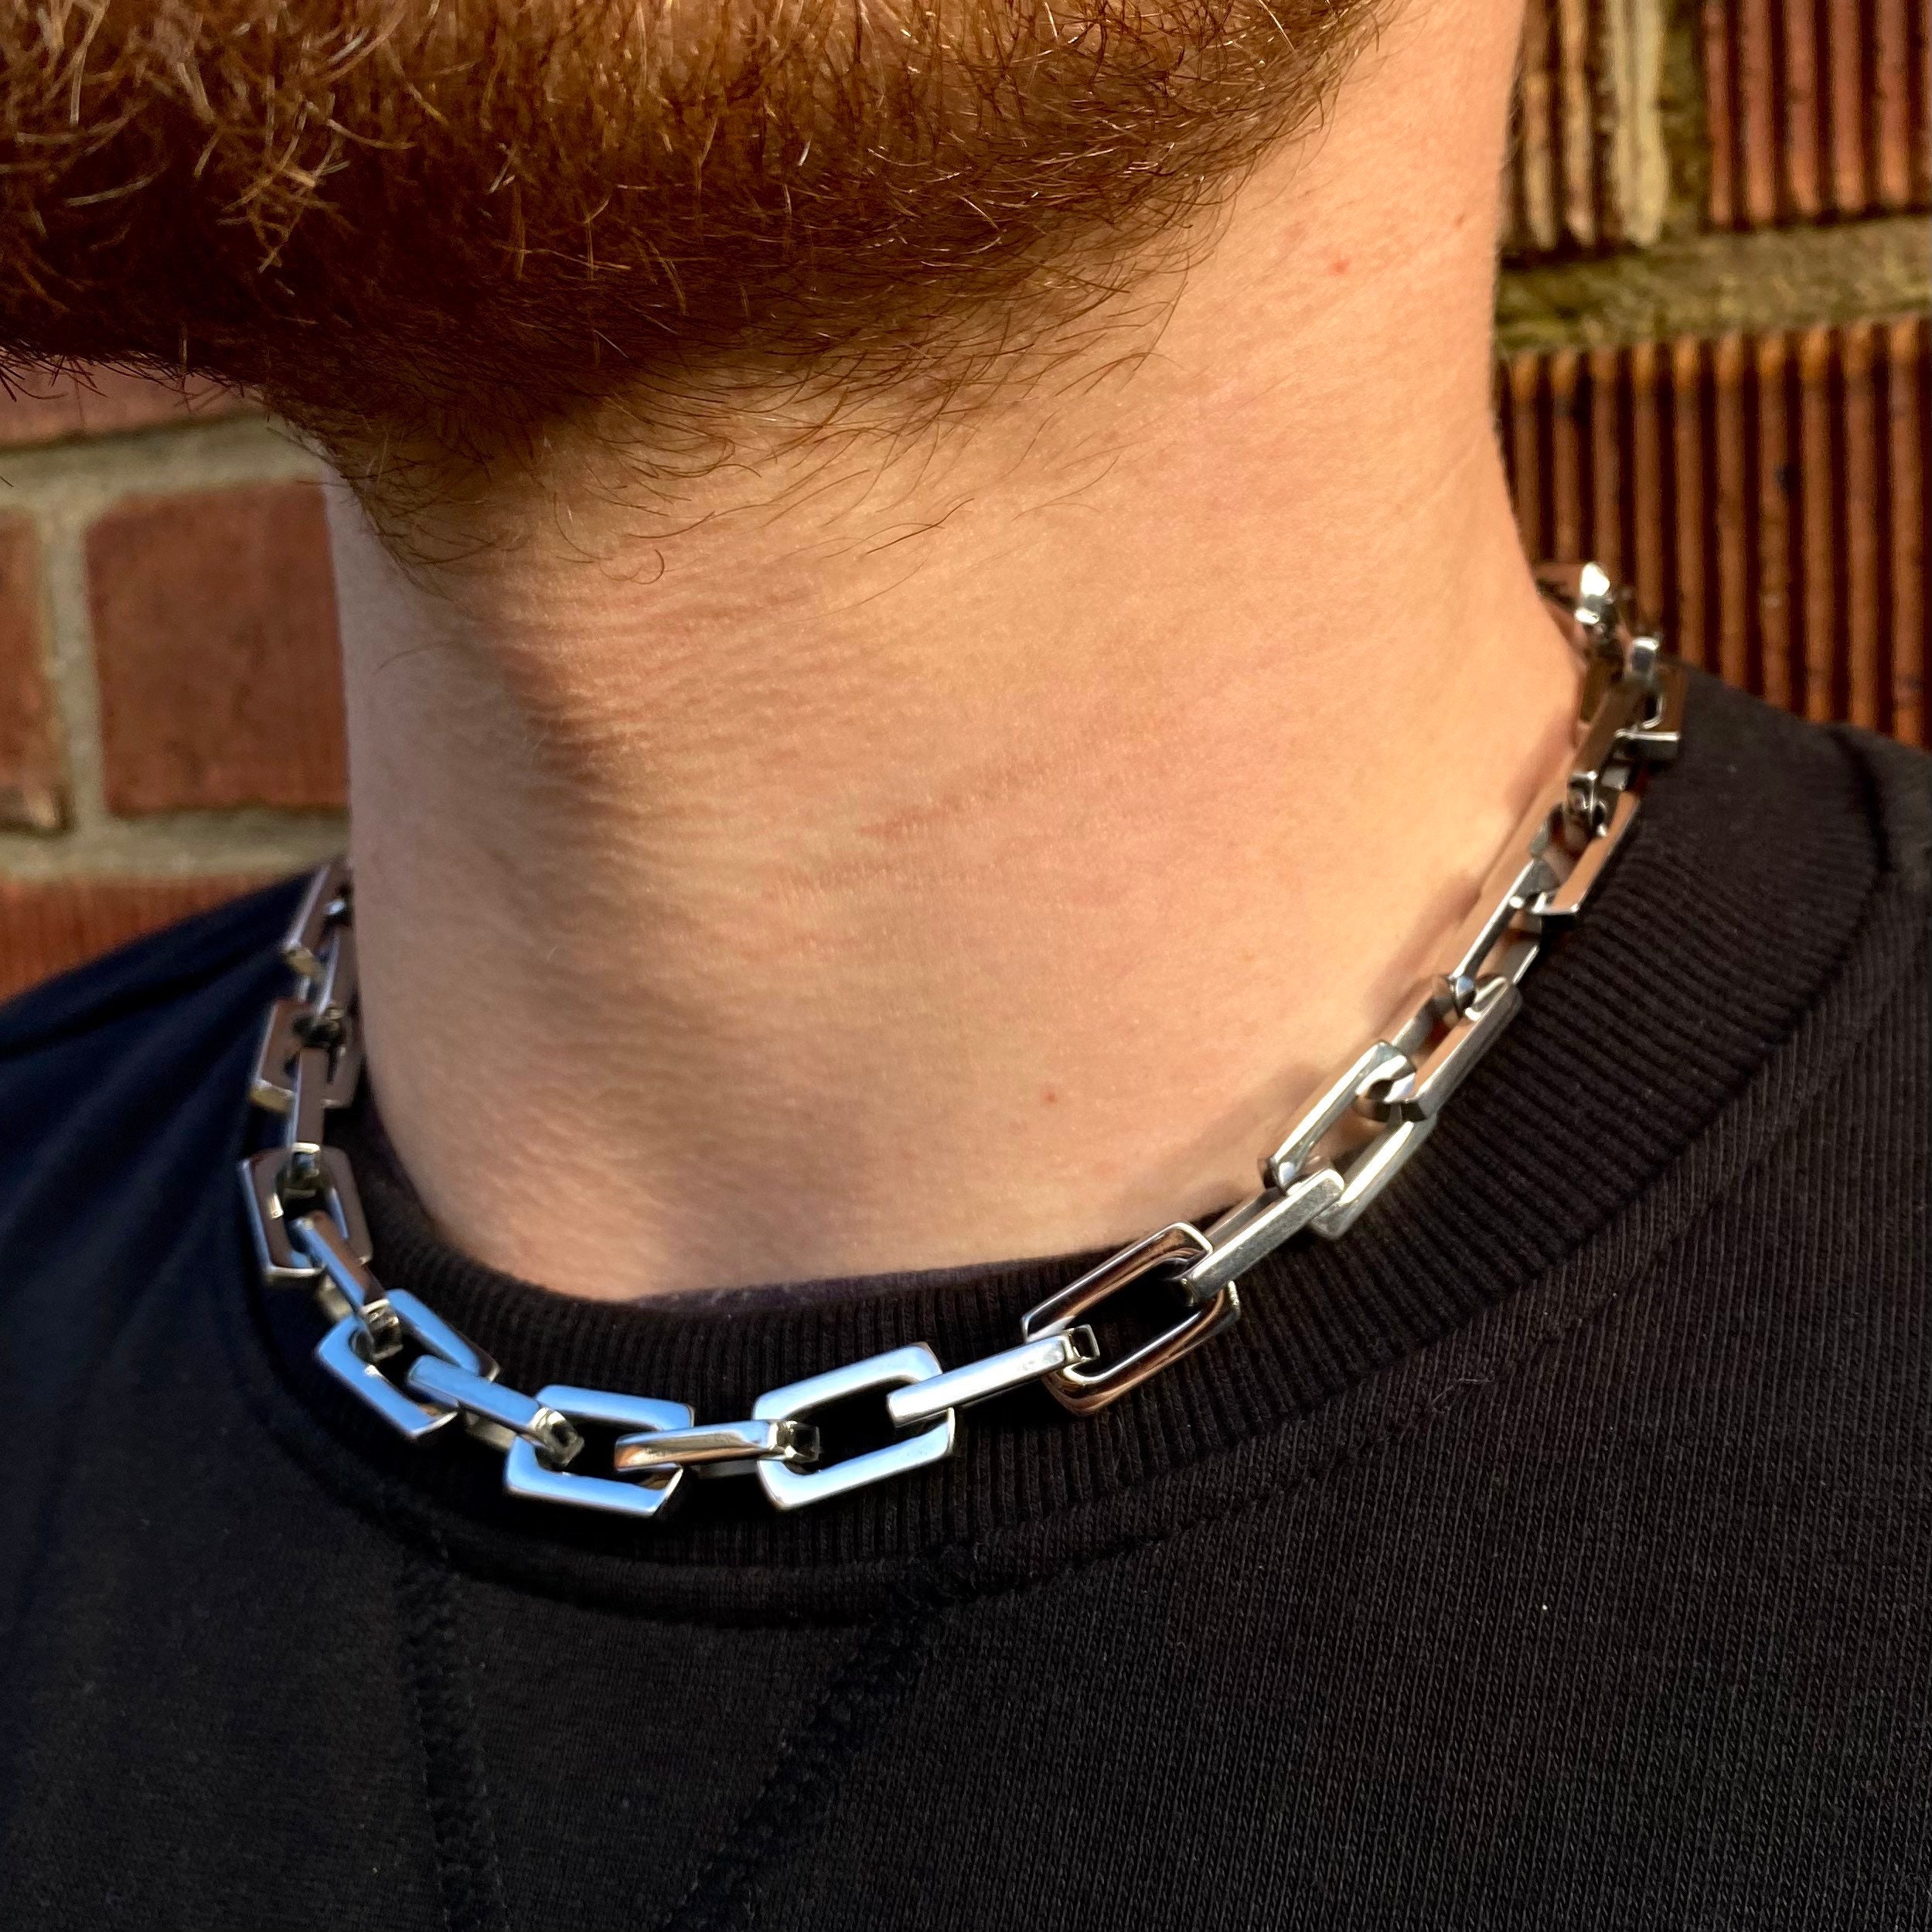 Silver Link Chain for Men - Mens Chain Necklace 18 - Heavy Stainless Steel Link Chain Thick Mens Silver Chain Jewelry - by Twistedpendant